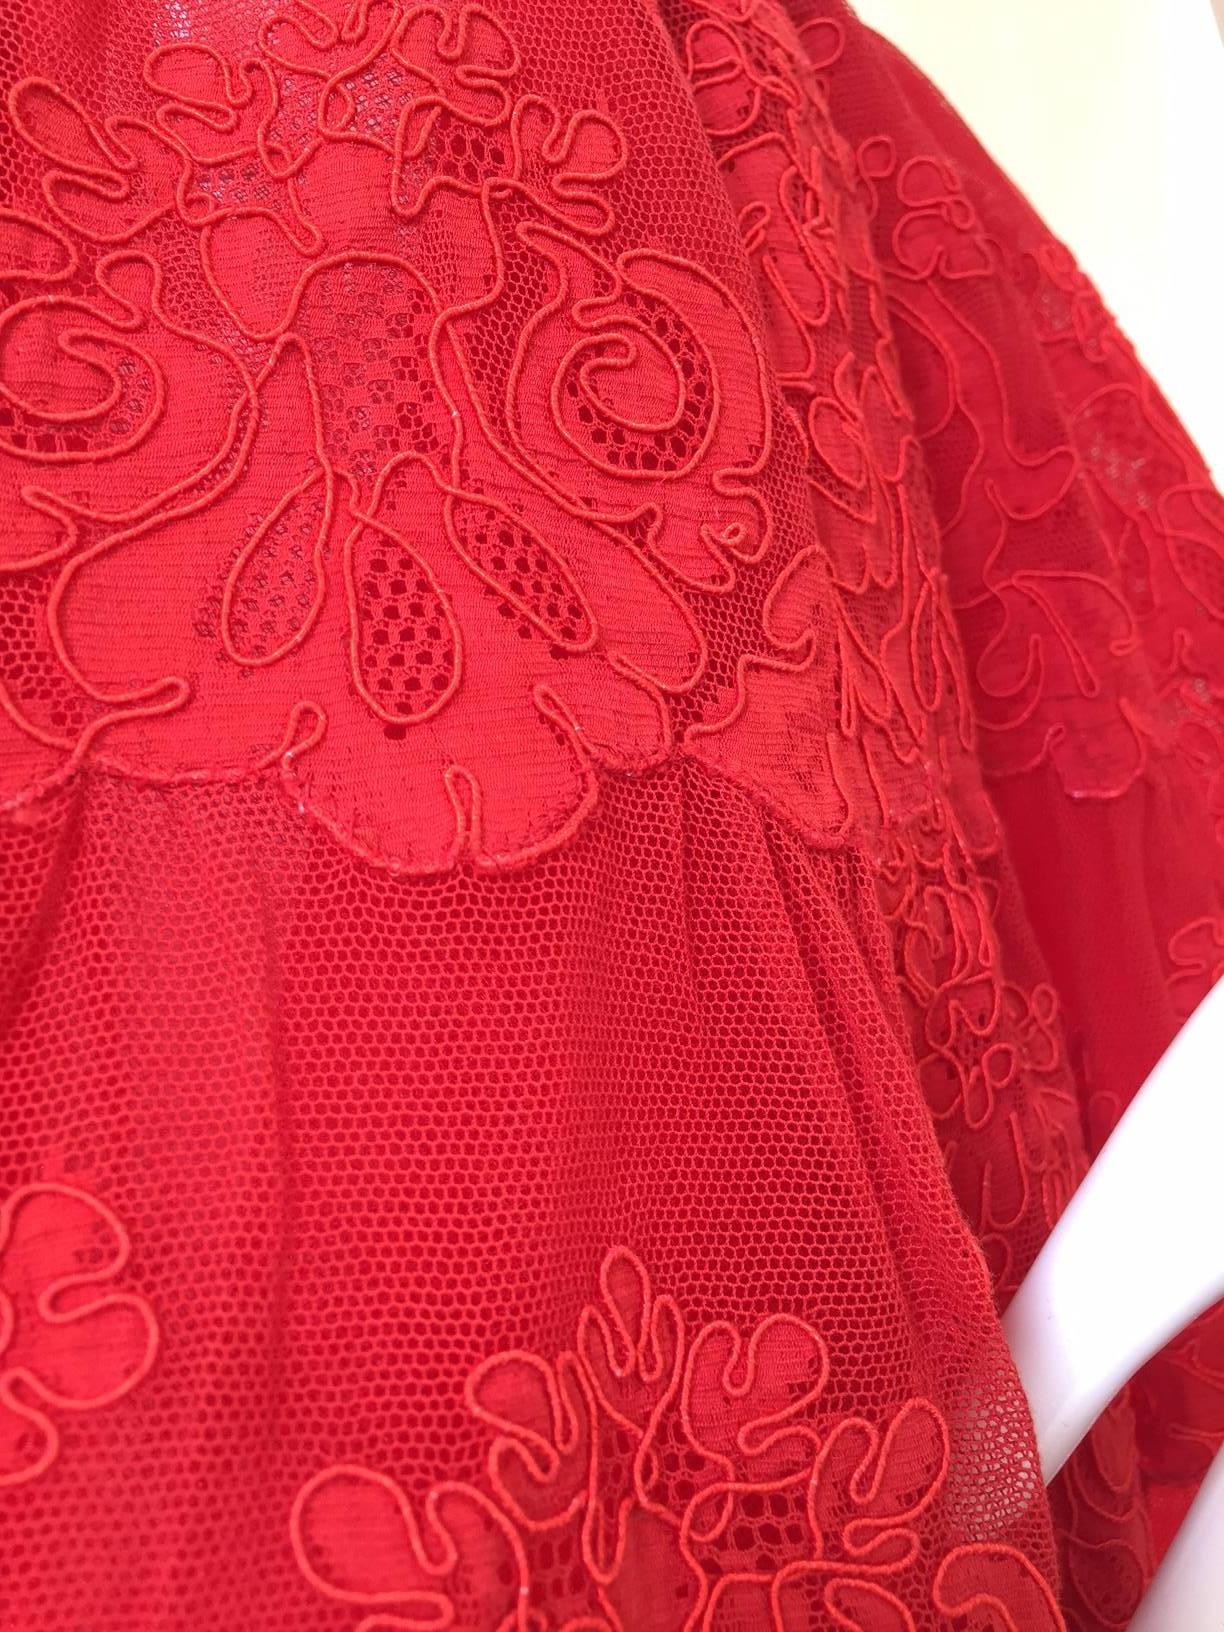 Vintage Vicky Tiel Couture Red Lace Strapless Party Dress In Excellent Condition For Sale In Beverly Hills, CA